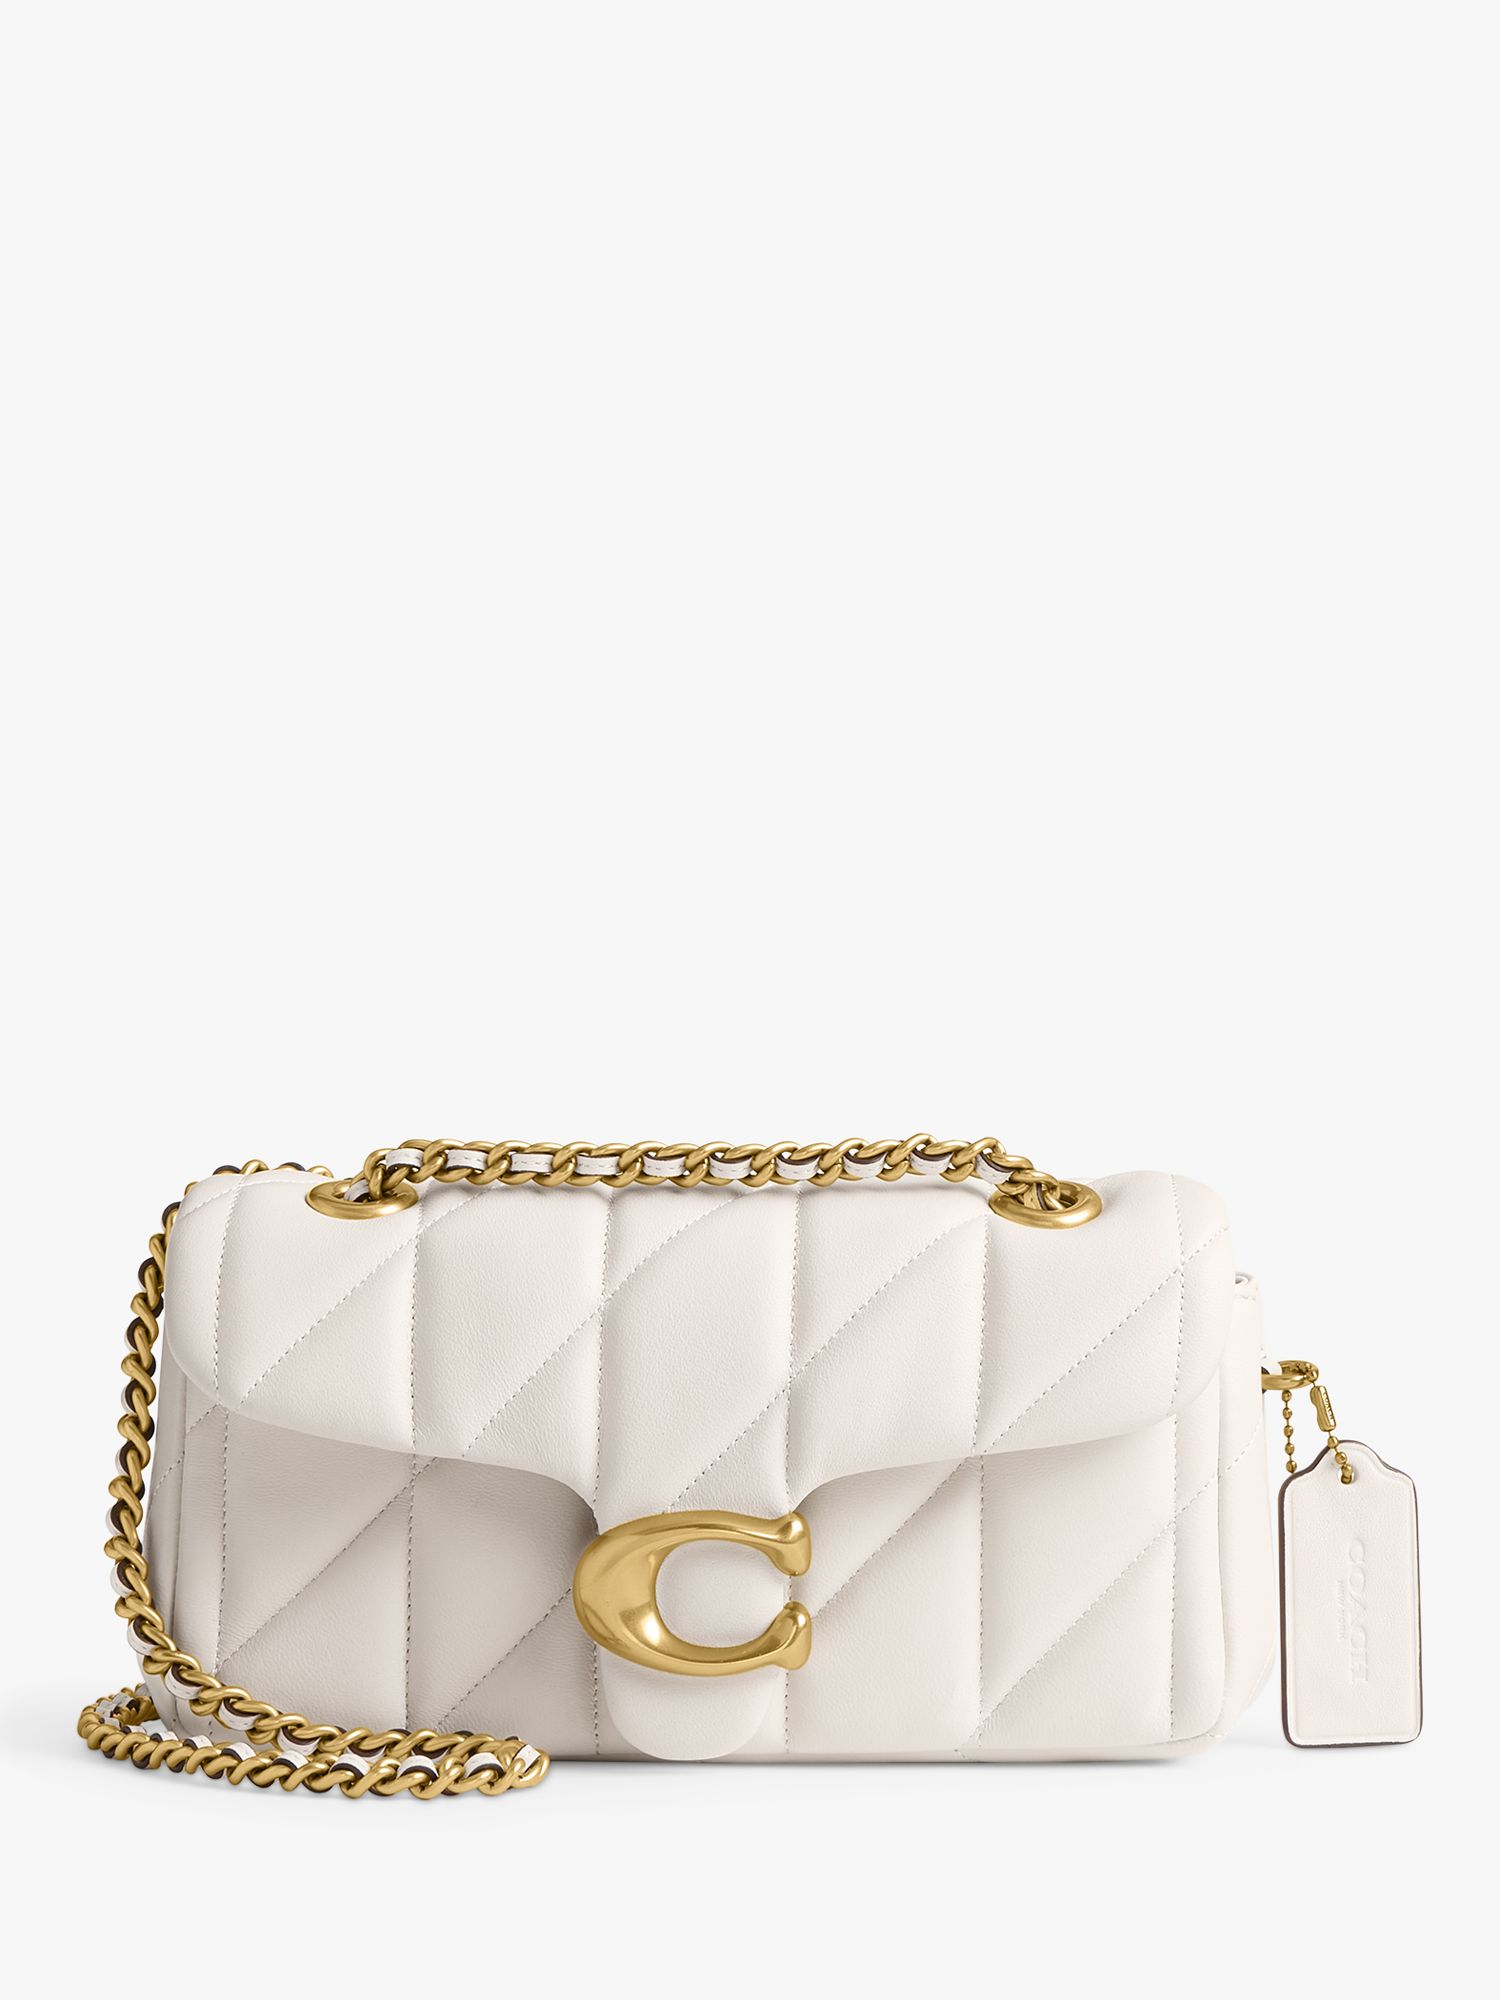 Buy Coach Tabby 20 Quilted Leather Chain Strap Cross Body Bag Online at johnlewis.com